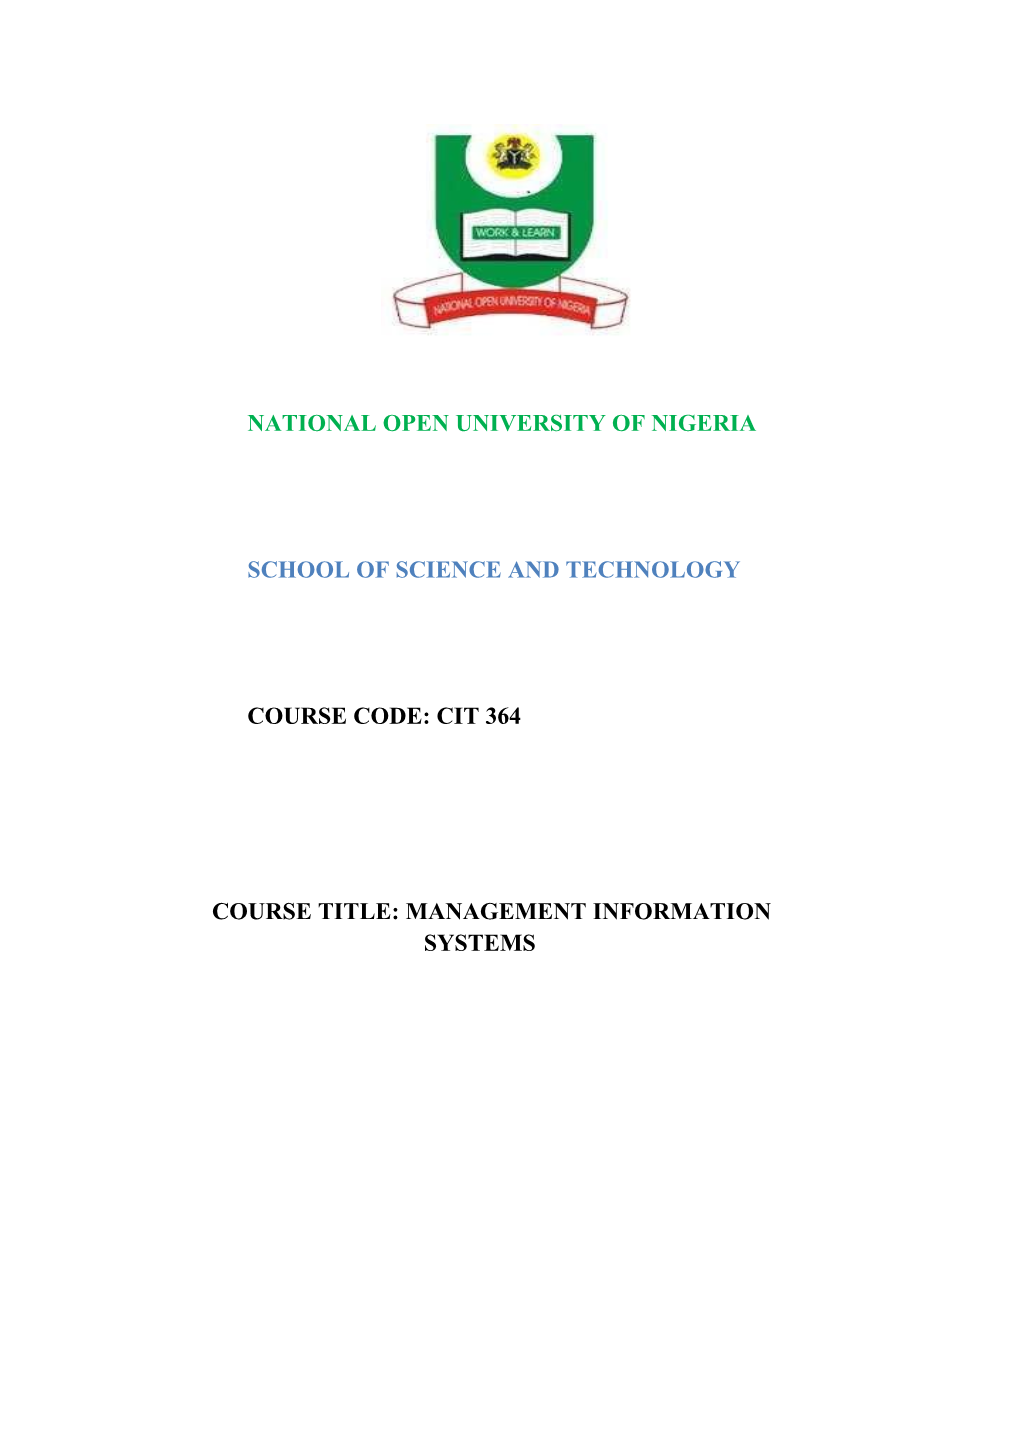 National Open University of Nigeria School of Science and Technology Course Code: Cit 364 Course Title: Management Information S